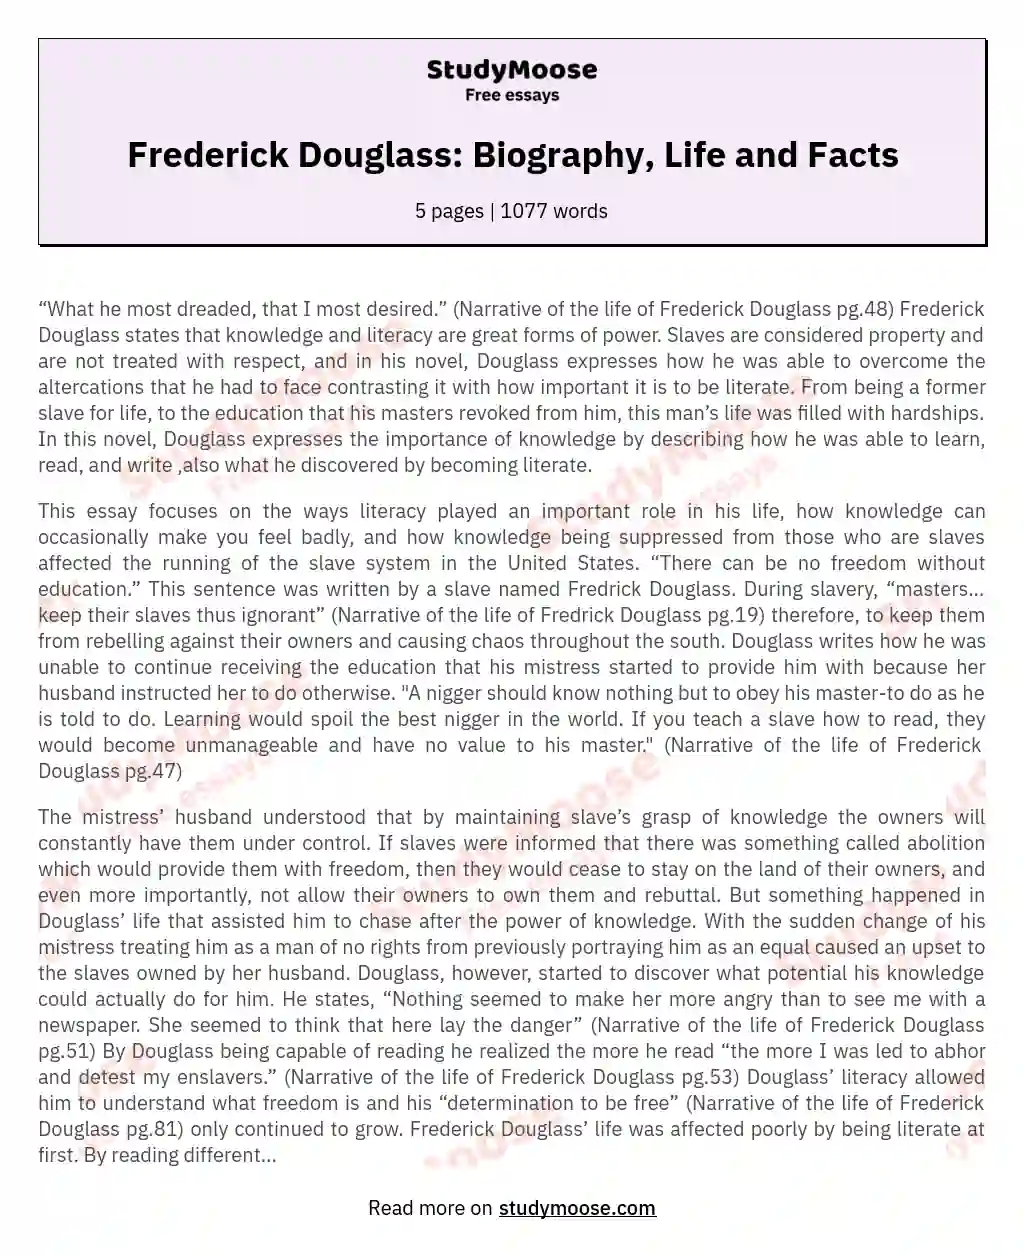 Frederick Douglass: Biography, Life and Facts